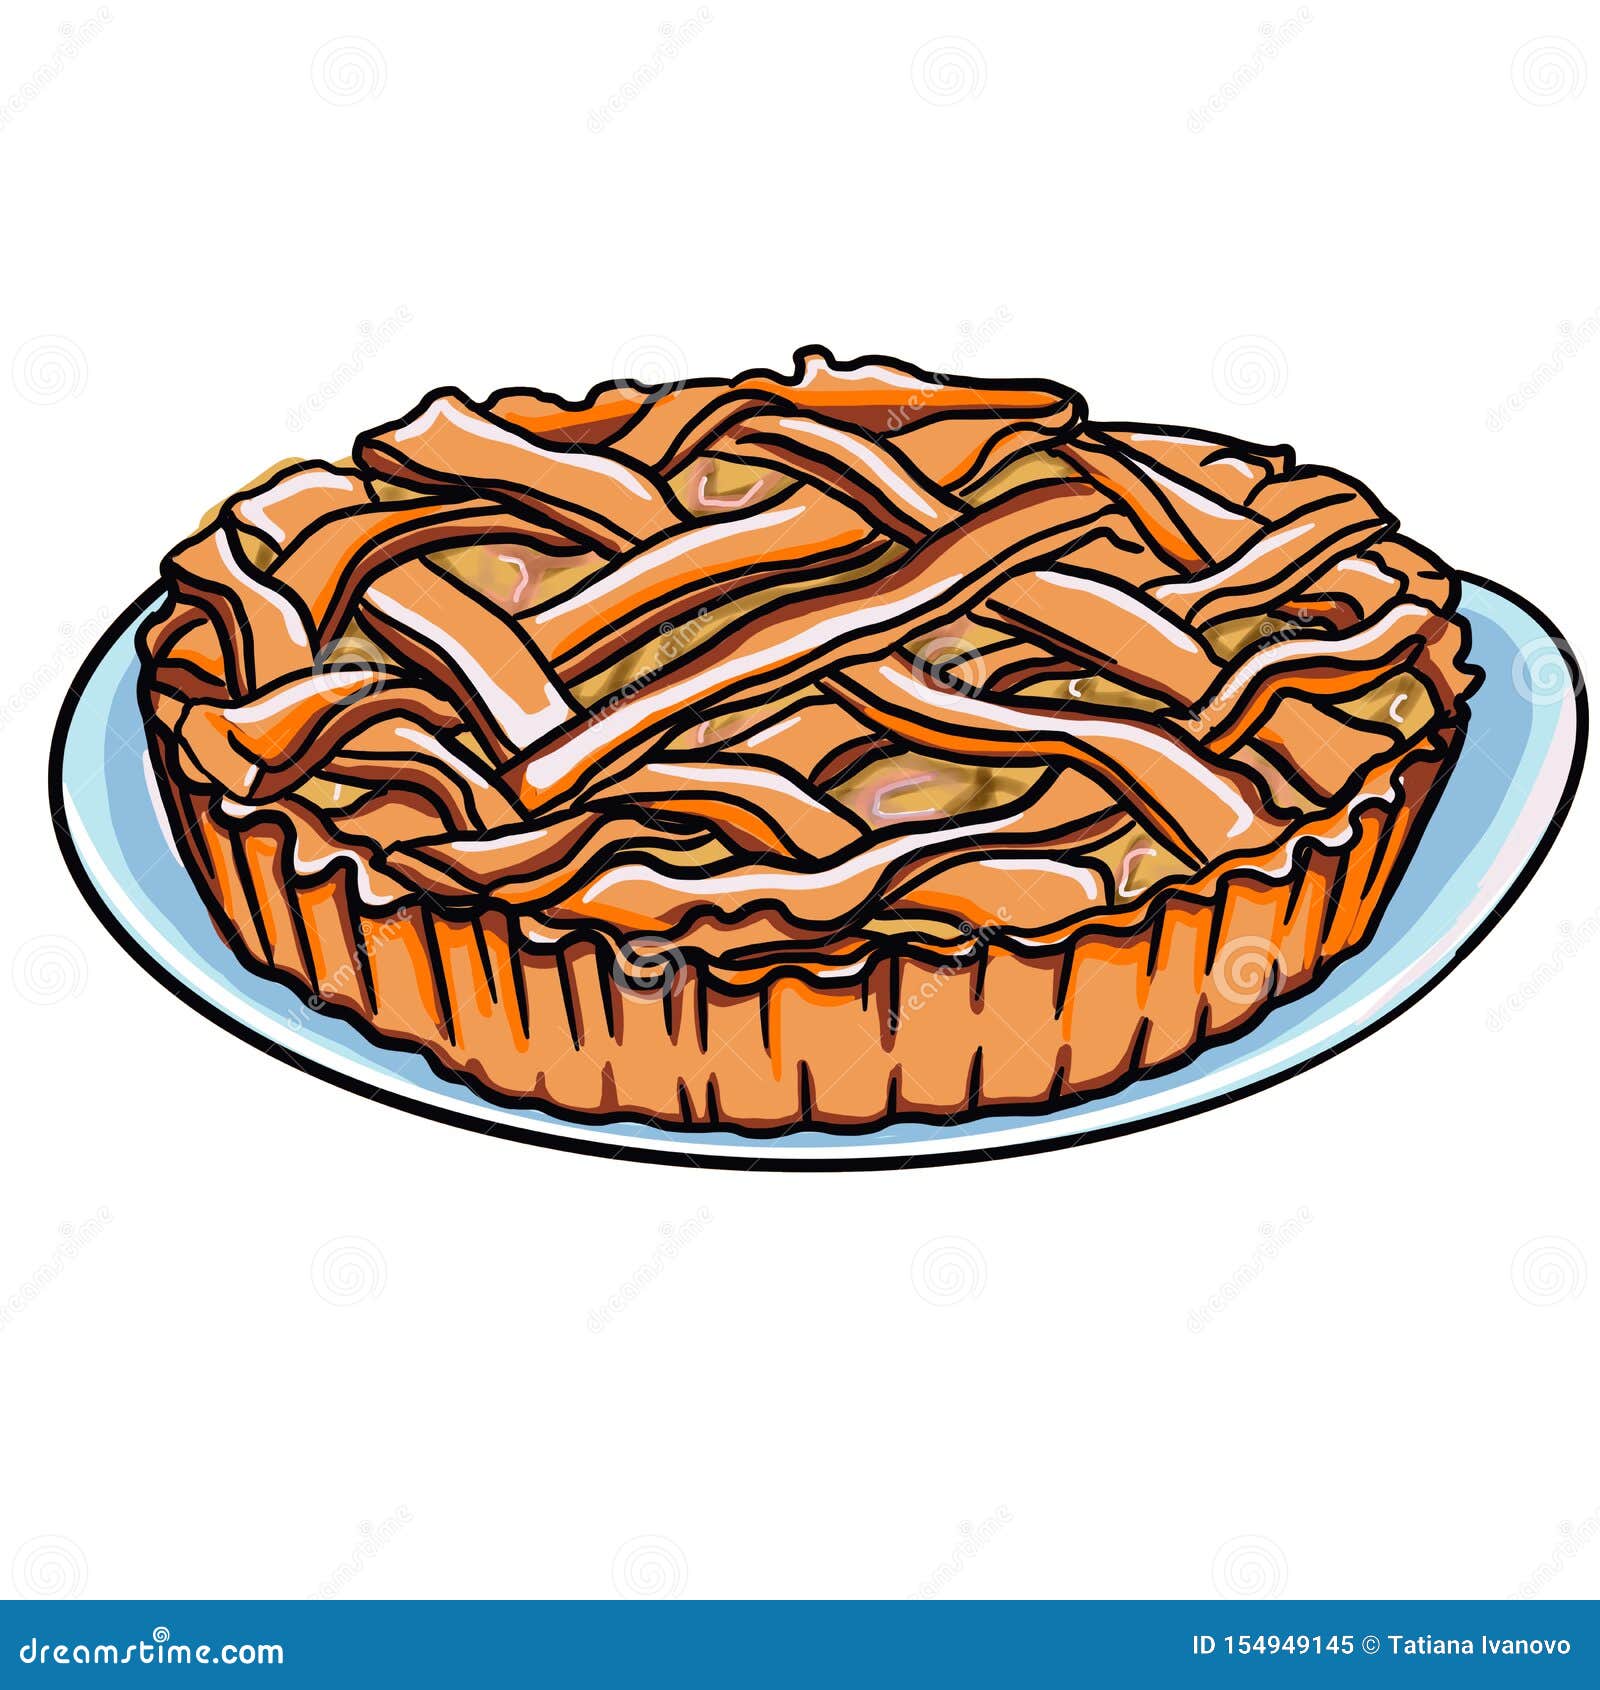 Drawing Apple Pie on a White Background Stock Illustration